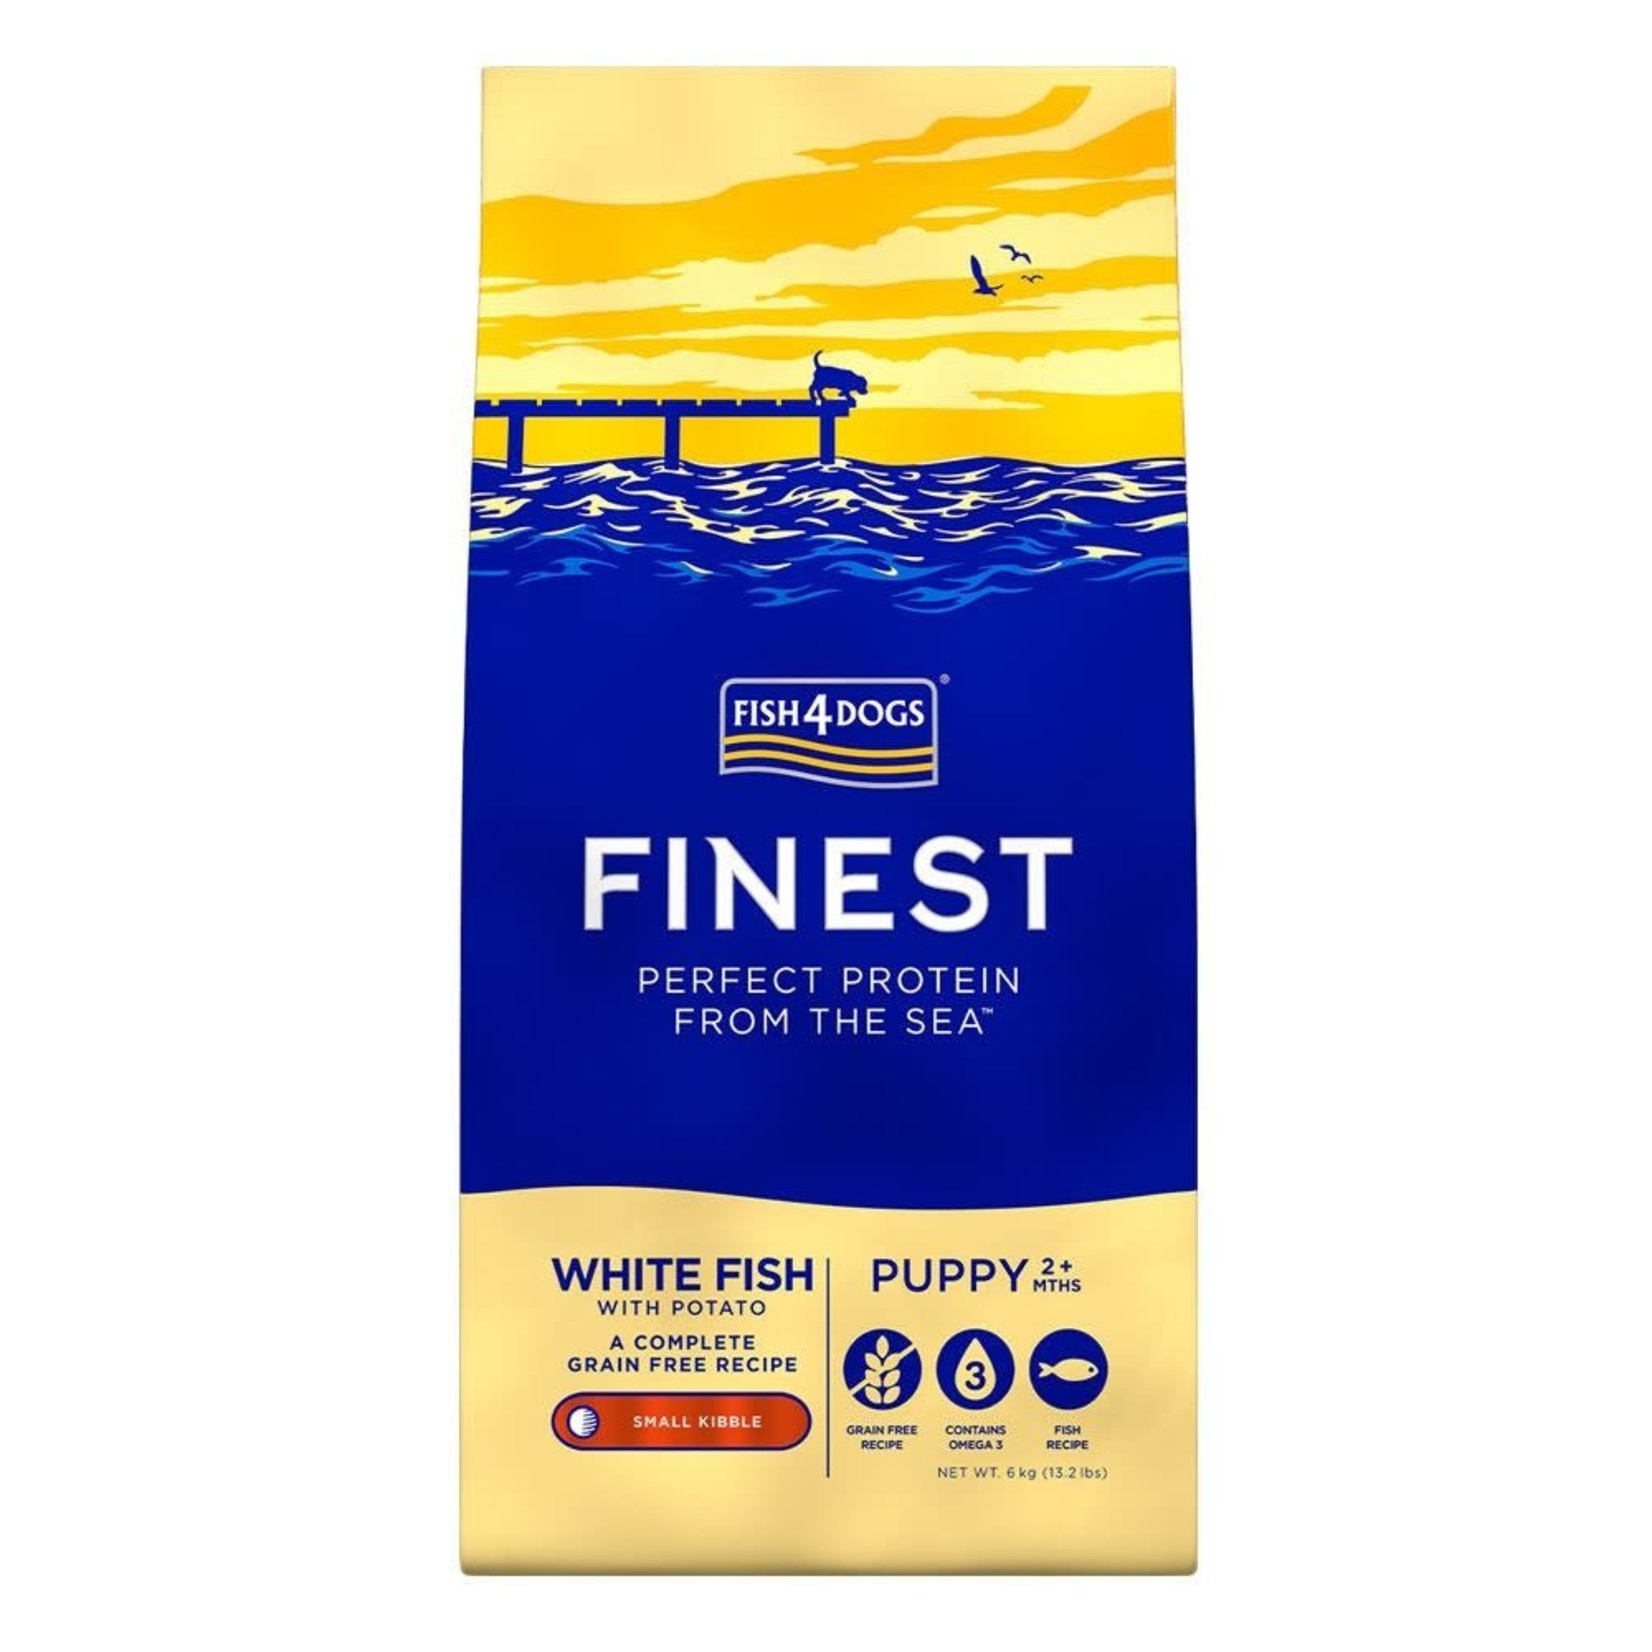 Fish4Dogs Finest Puppy Food Large Kibble White Fish with Potato, 1.5kg